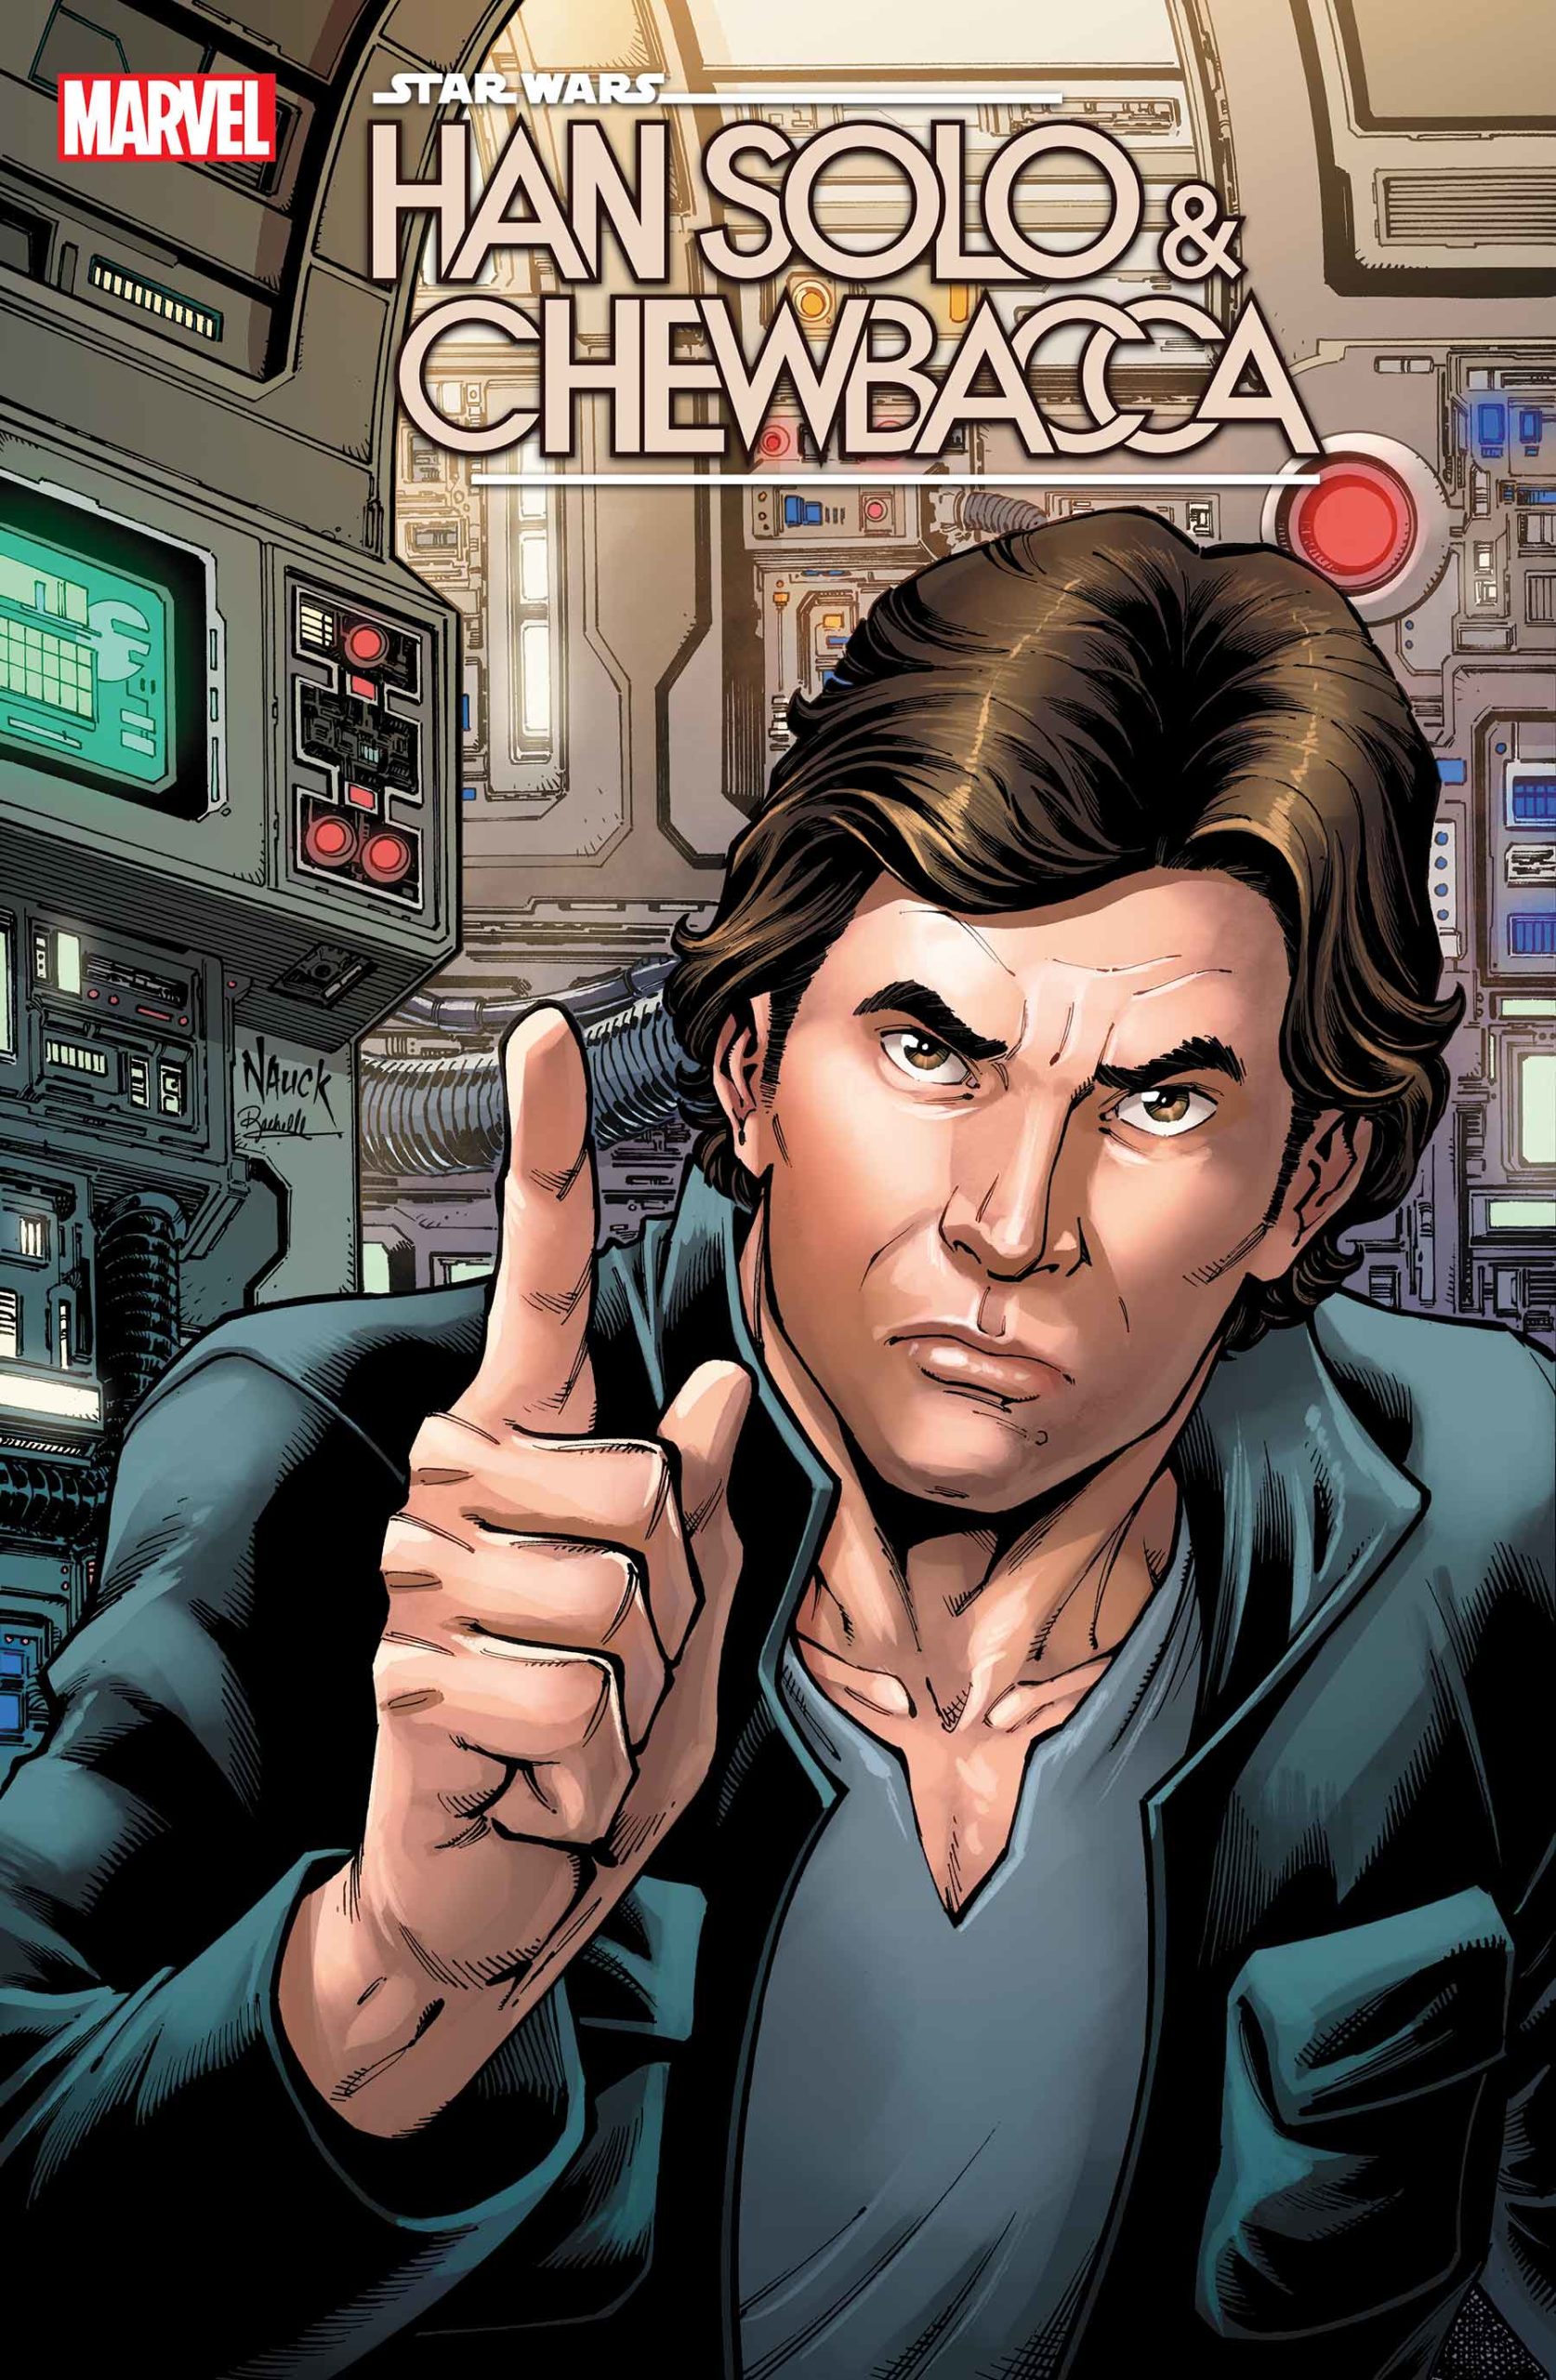 Han Solo & Chewbacca #9 (Todd Nauck Variant Cover)